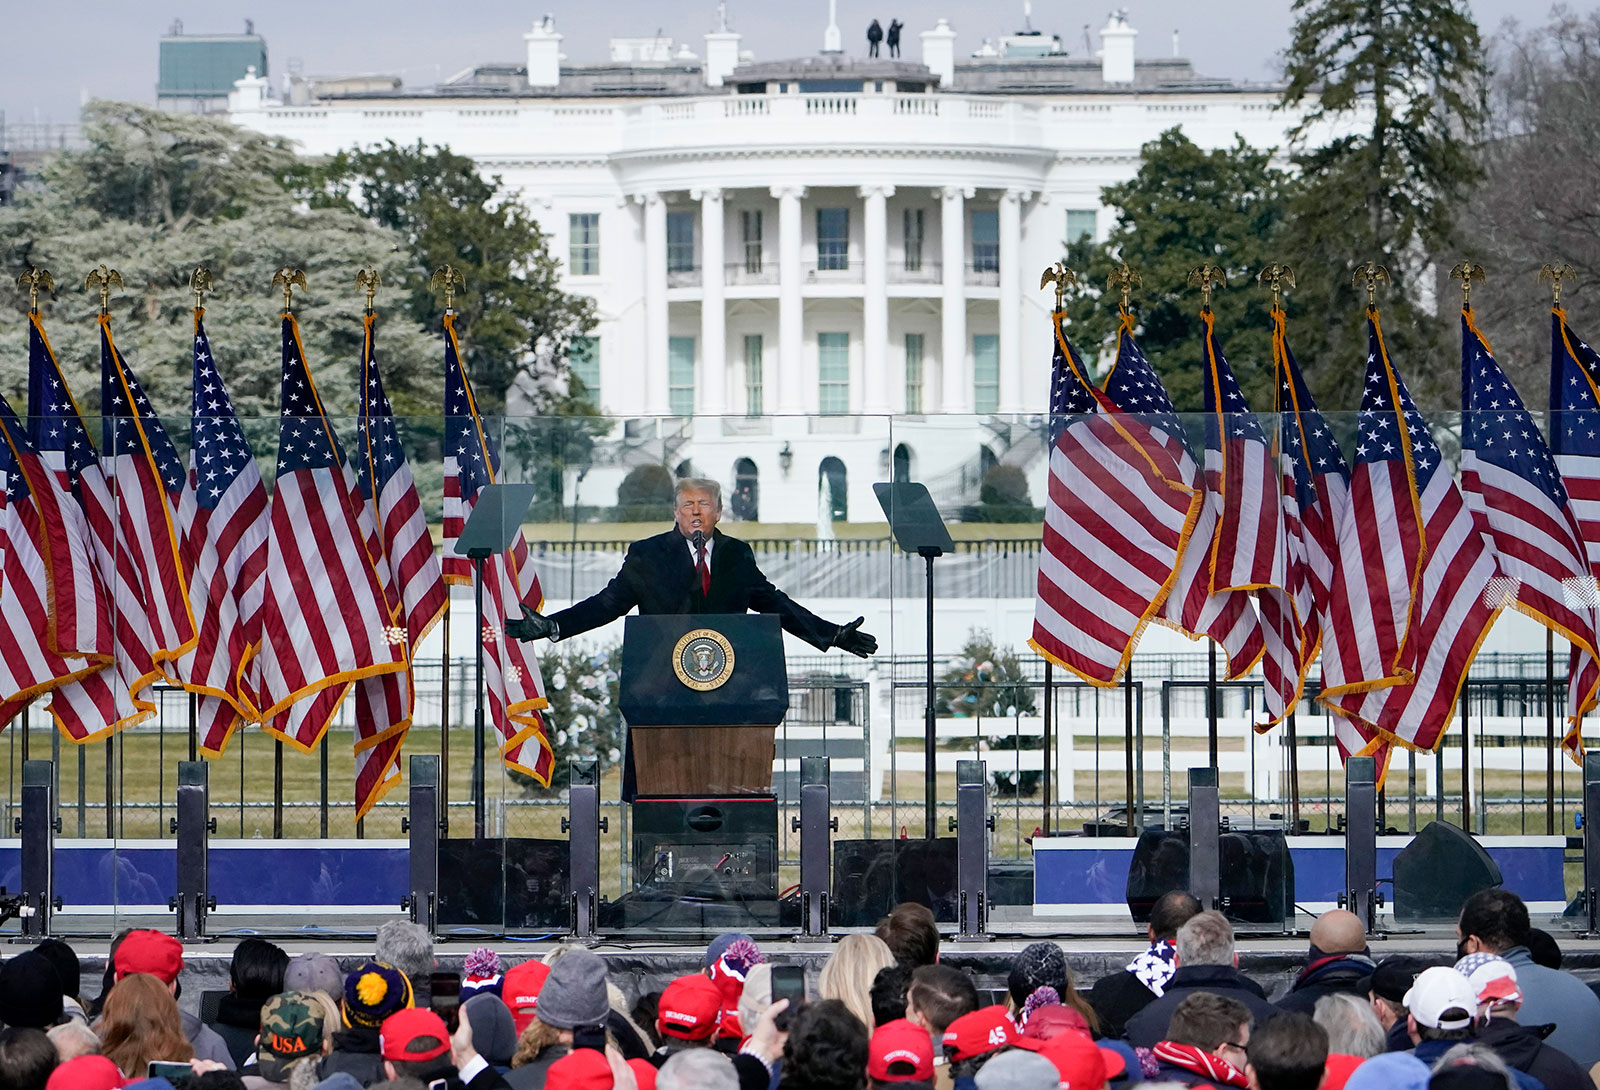 Then-President Donald Trump speaks at a rally in Washington, DC on January 6, 2021.